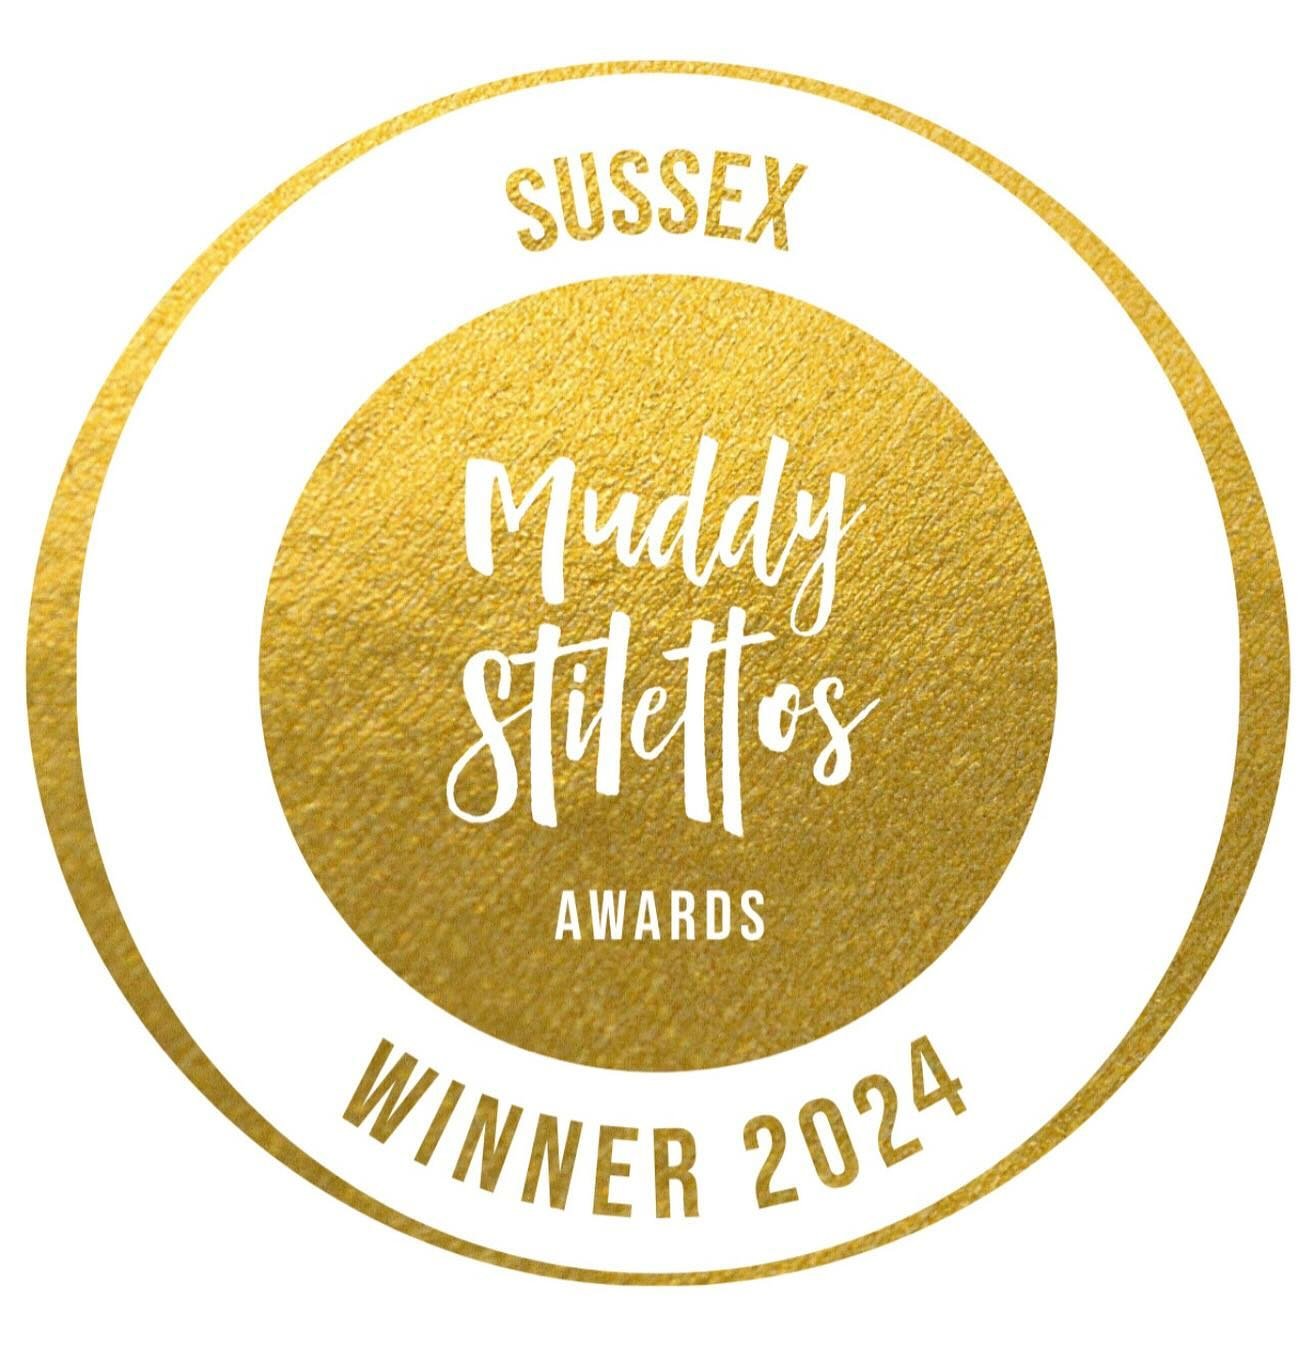 We won Best Lifestyle Store in Sussex! 

Thank you so much to everyone who took the time to vote, we really appreciate it 💛